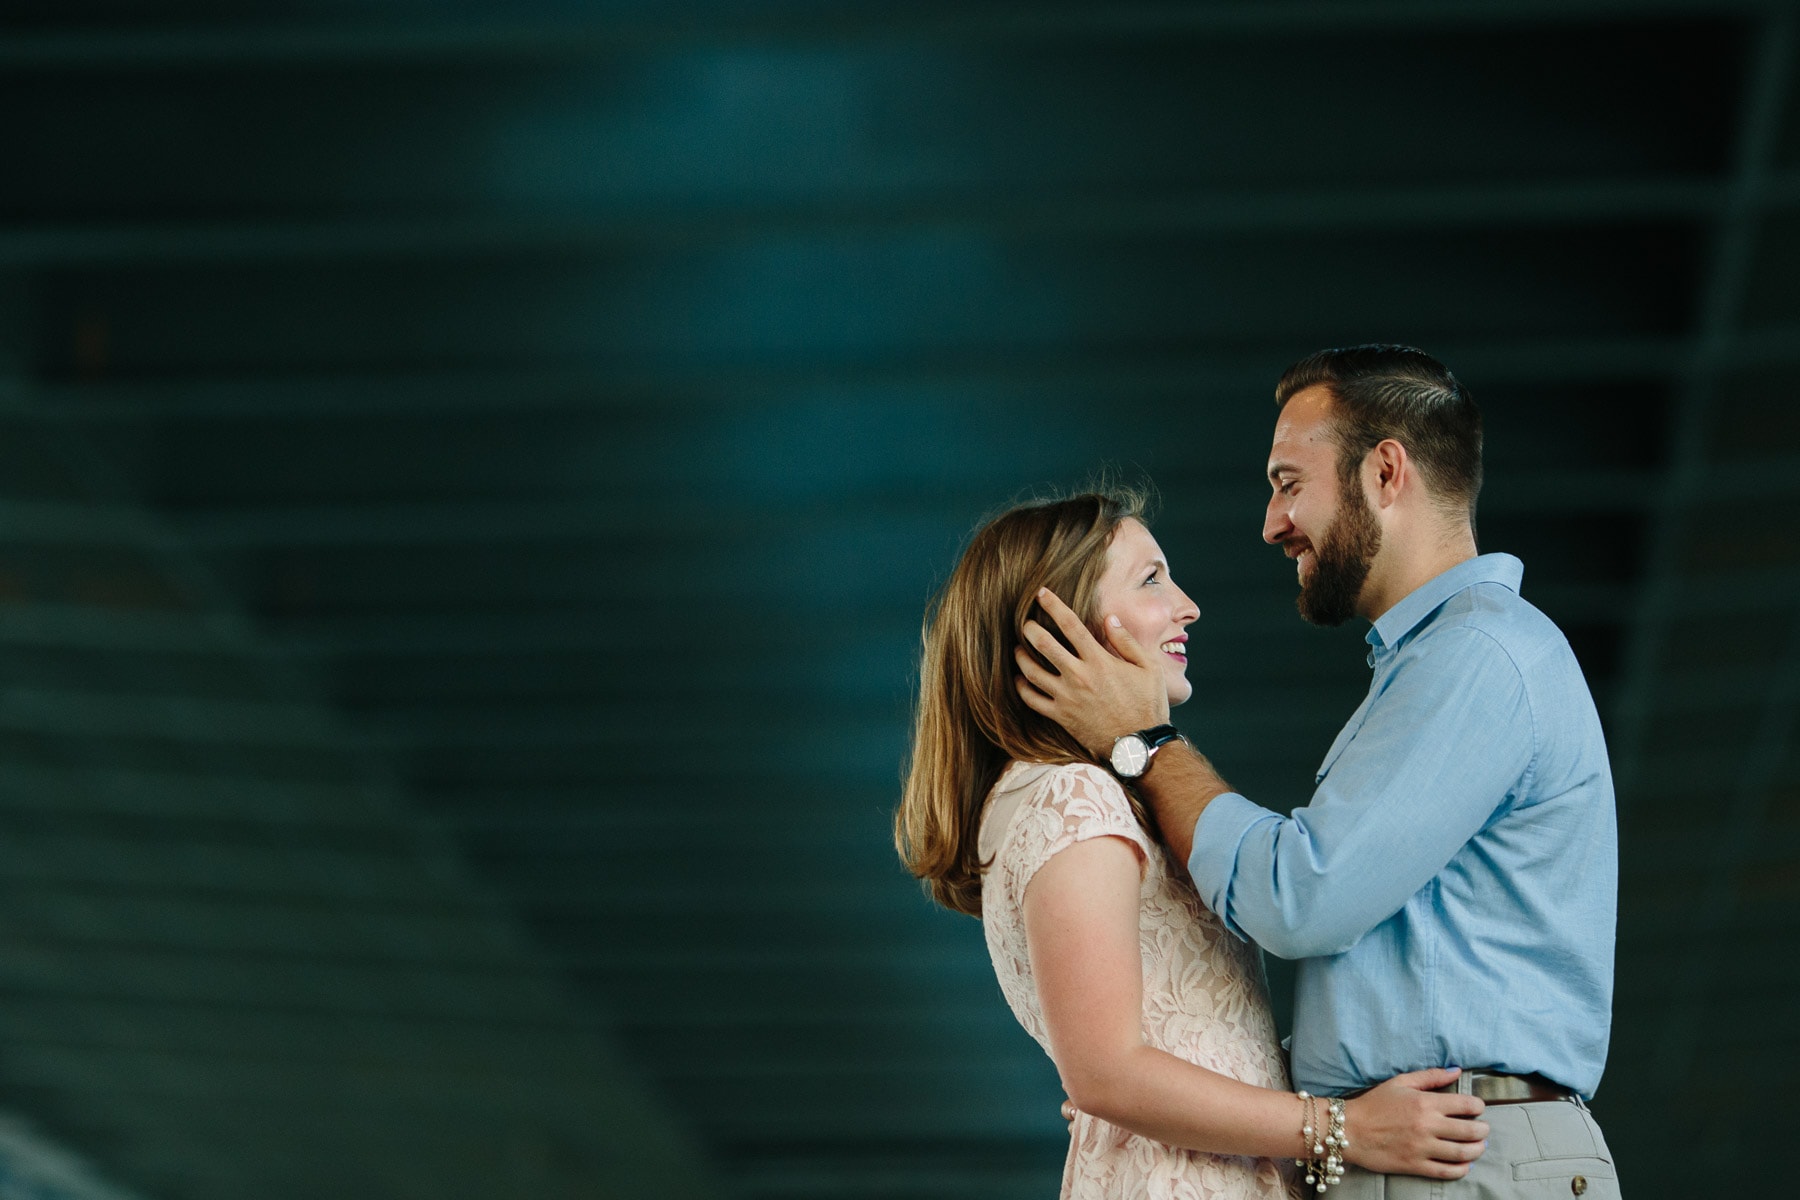 Peggy and Anthony's engagement photography session by the Zakim Bridge - North Point Park | Kelly Benvenuto Photography | Boston Engagement Photographer